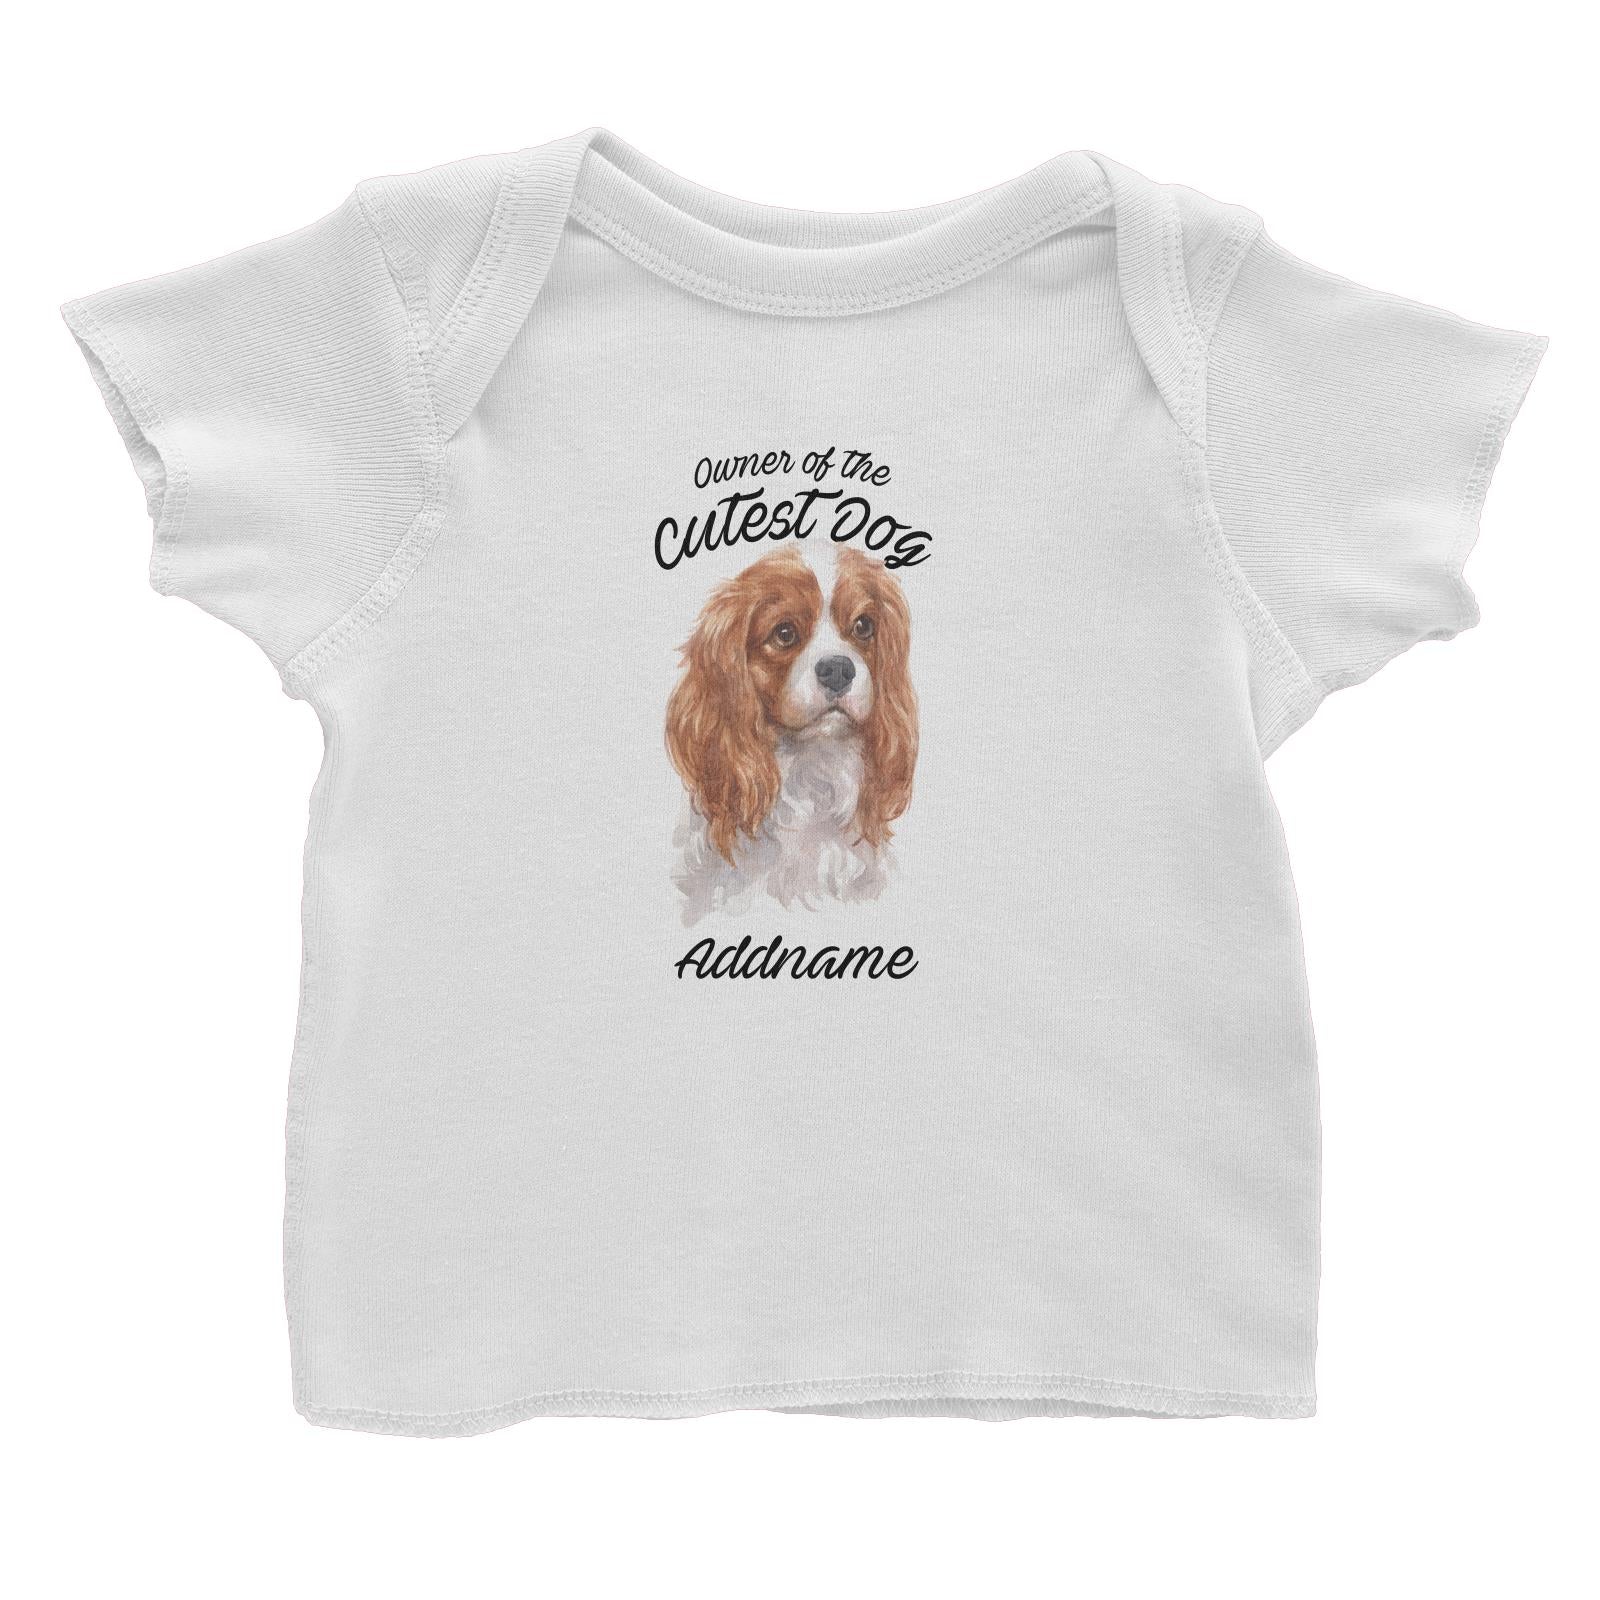 Watercolor Dog Owner Of The Cutest Dog King Charles Spaniel Addname Baby T-Shirt